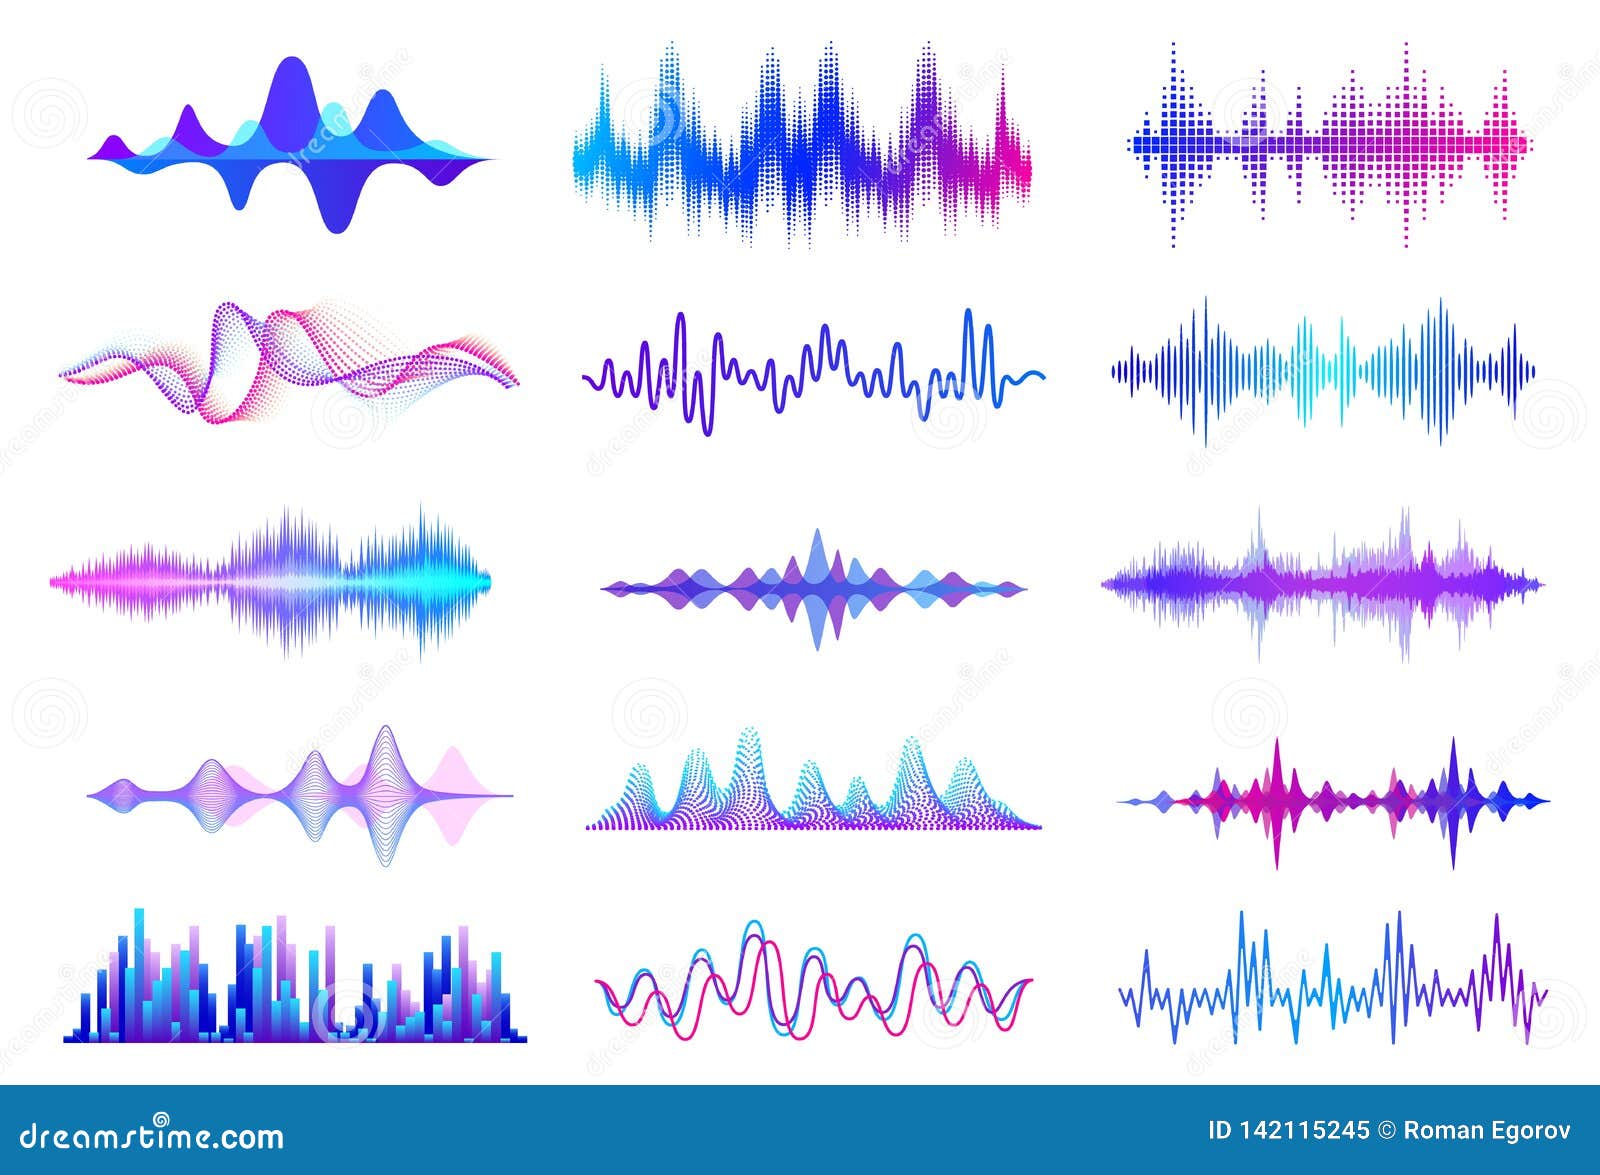 sound waves. frequency audio waveform, music wave hud interface s, voice graph signal.  audio wave